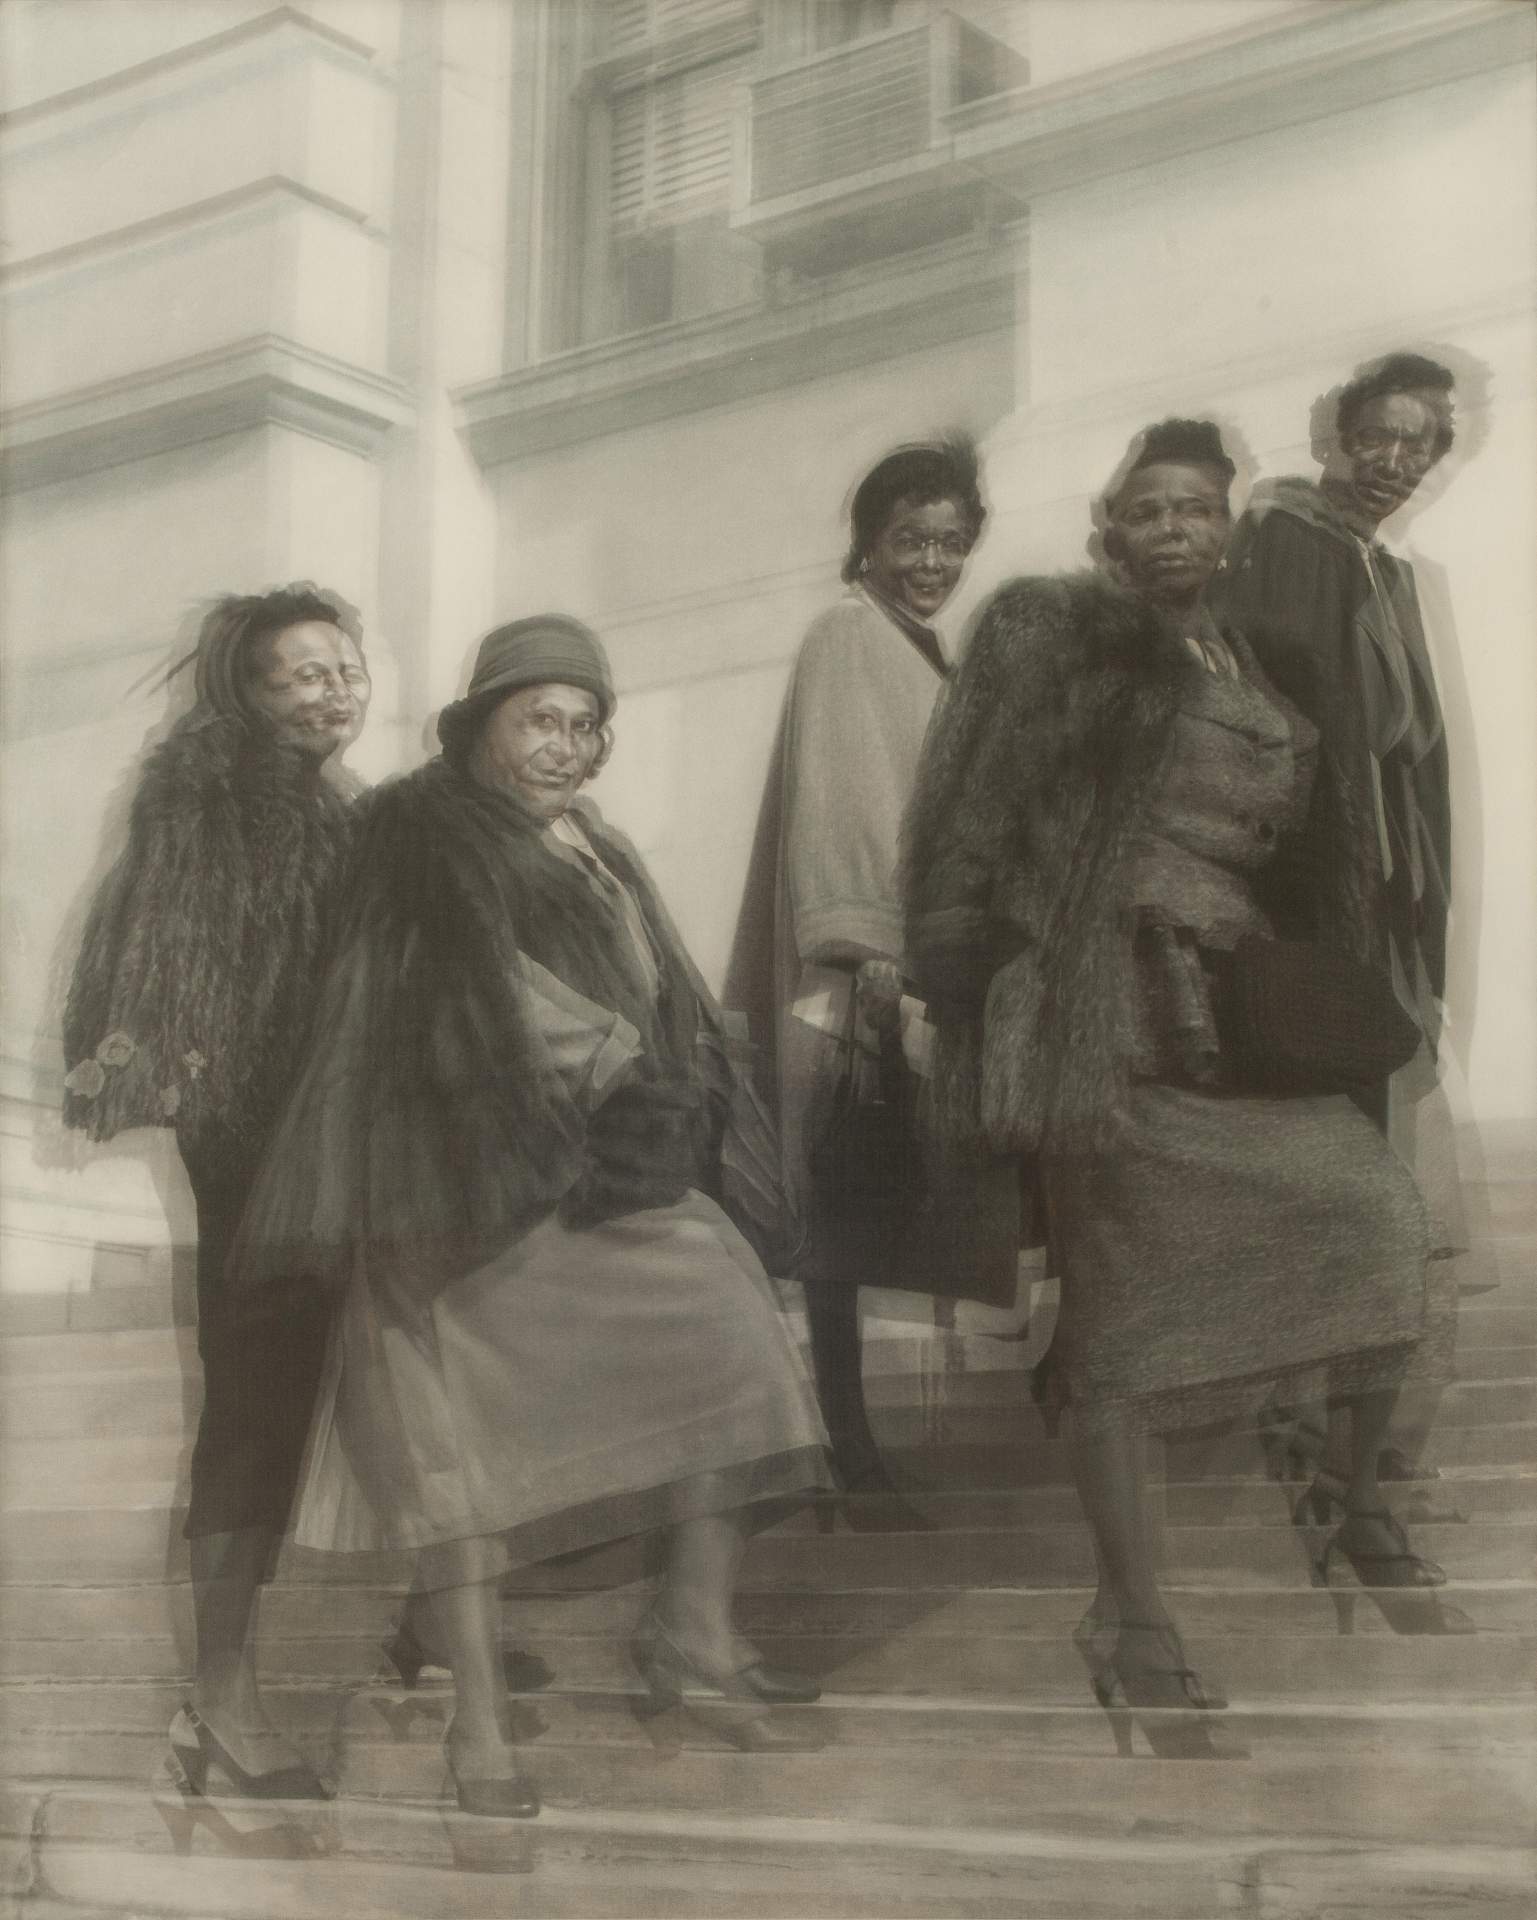 Ruby Blackburn and Four Women on Steps (after unknown photographer, Auburn Avenue Research Library Collection,